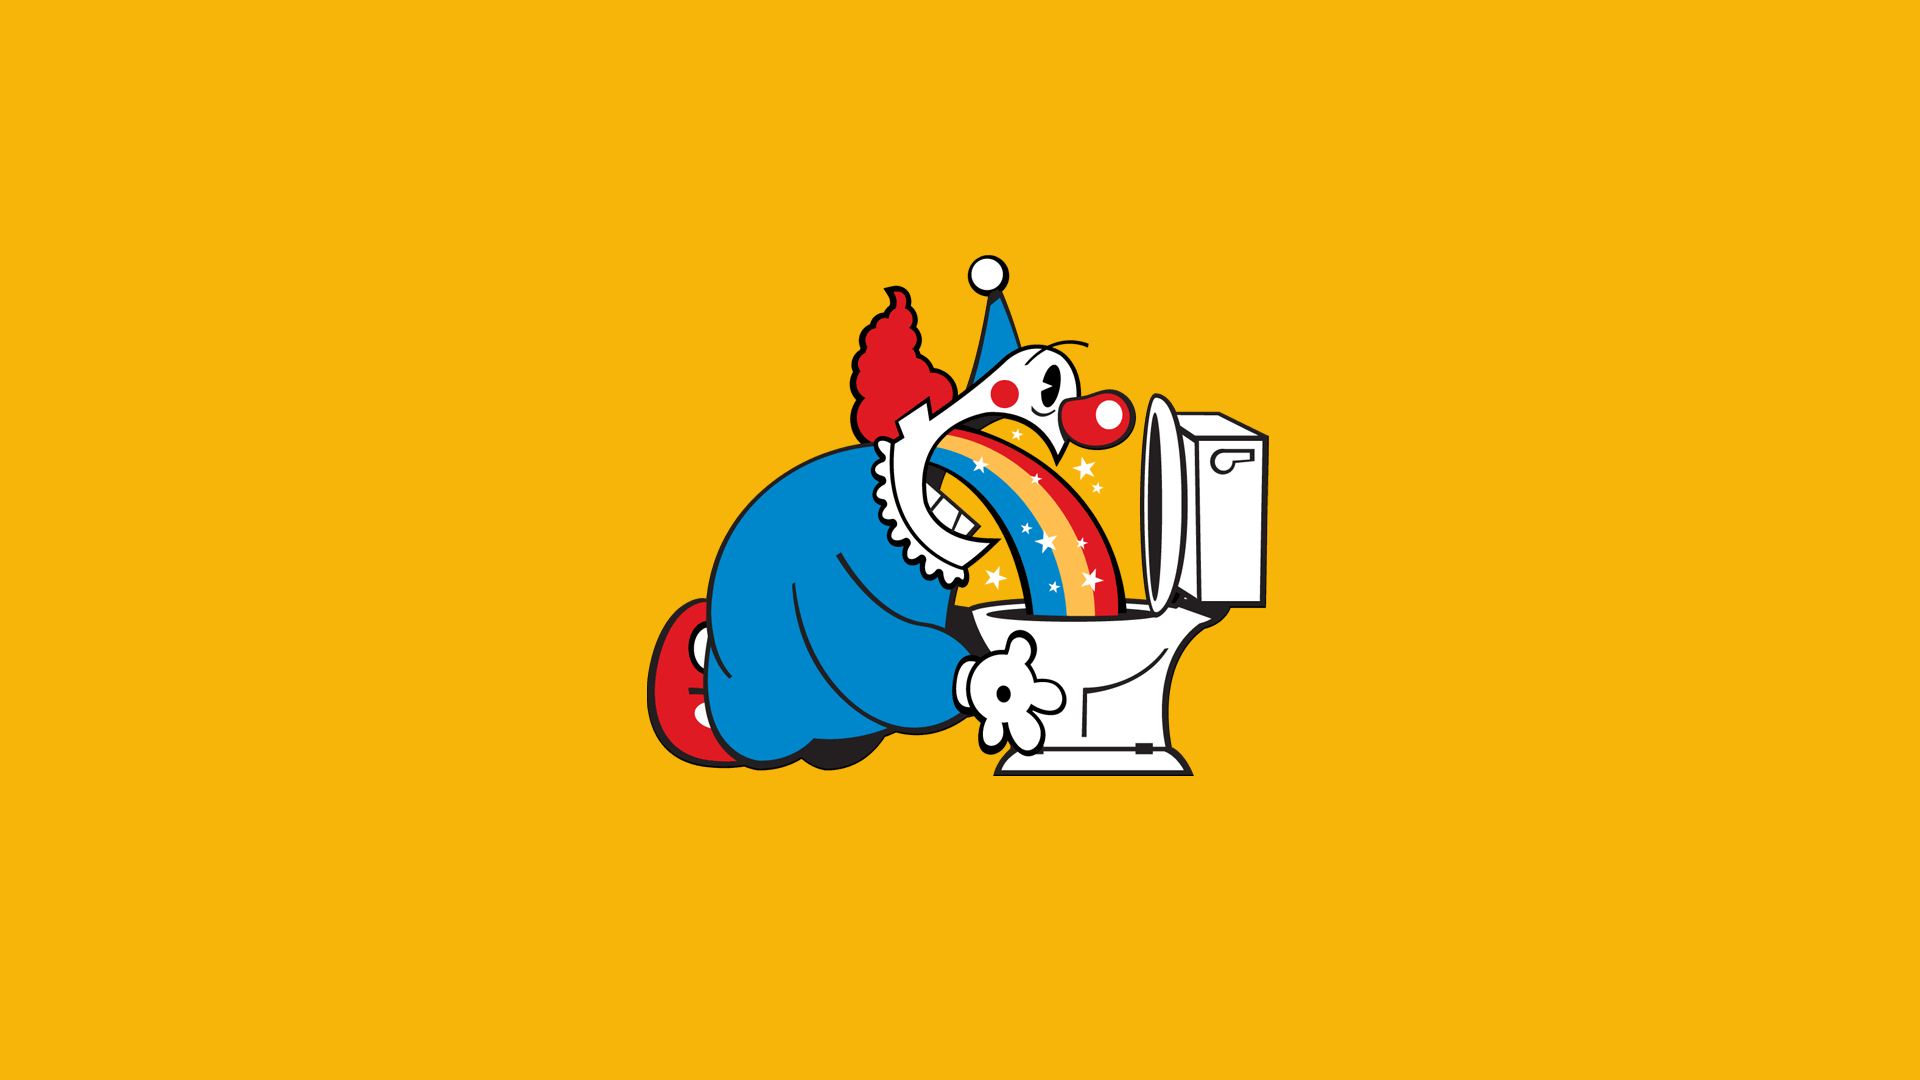 Primary Colors Clowns Rainbows Yellow 1920x1080